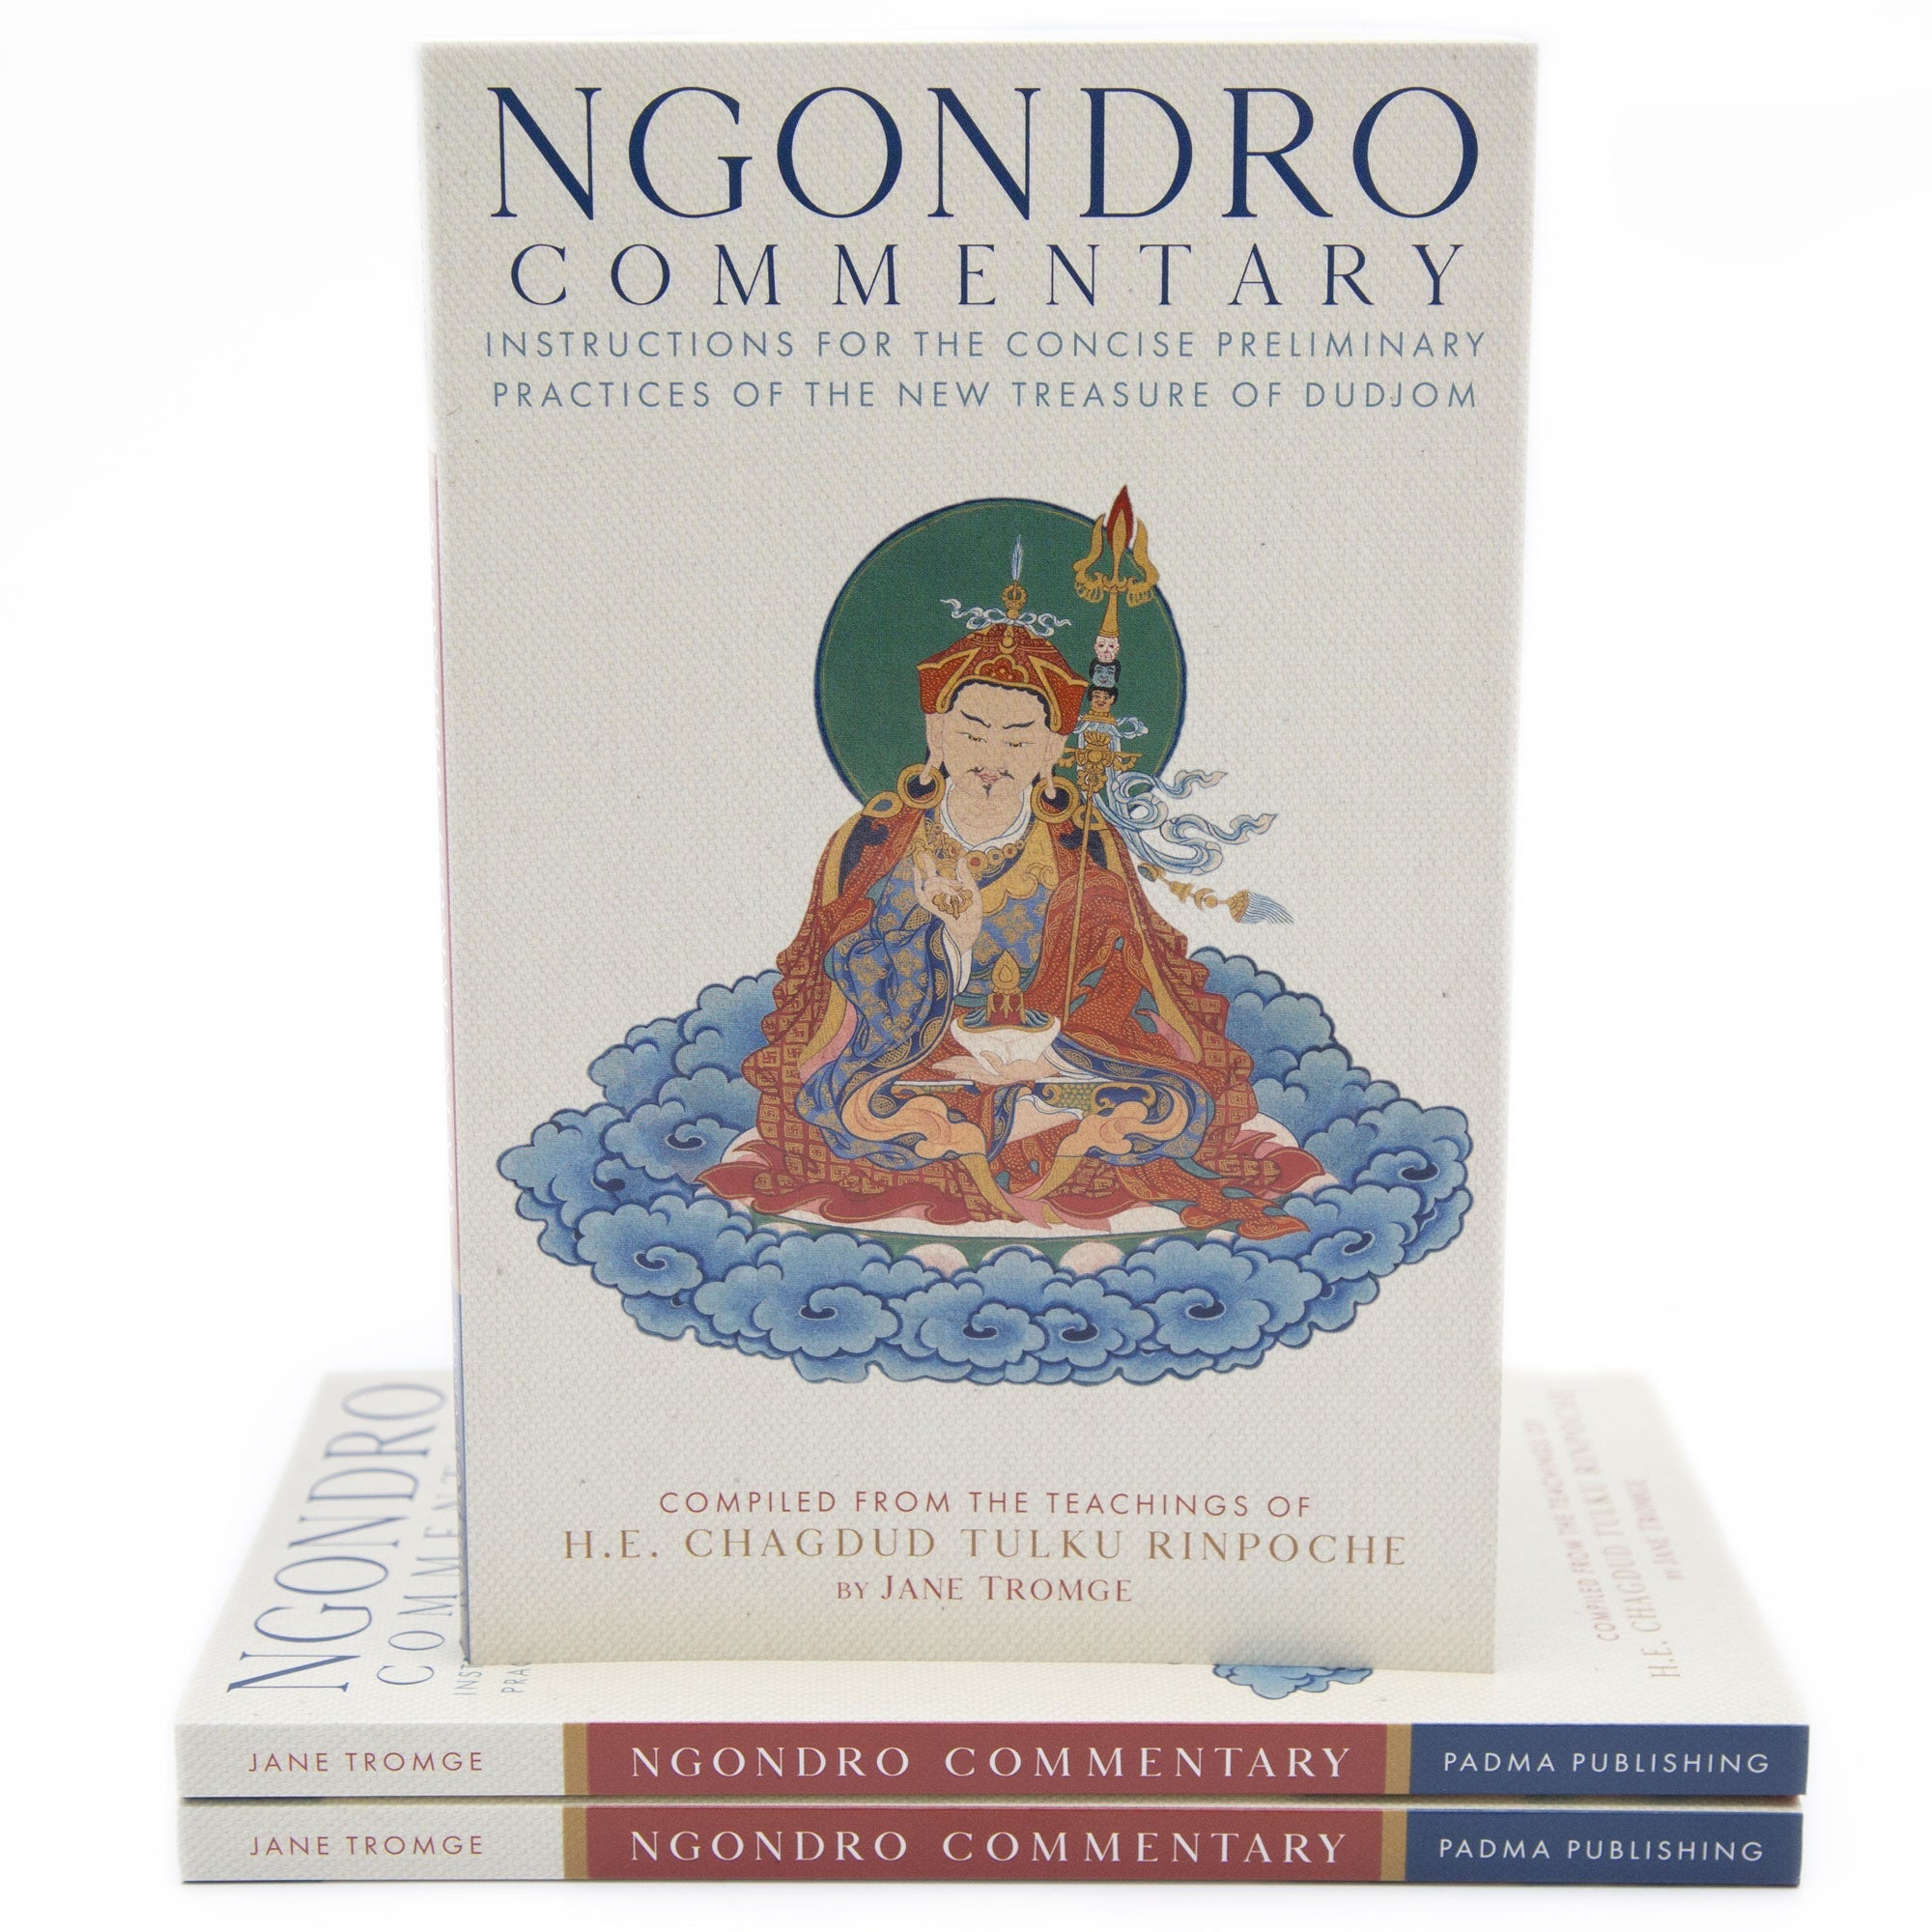 Ngondro Commentary - Imperfect